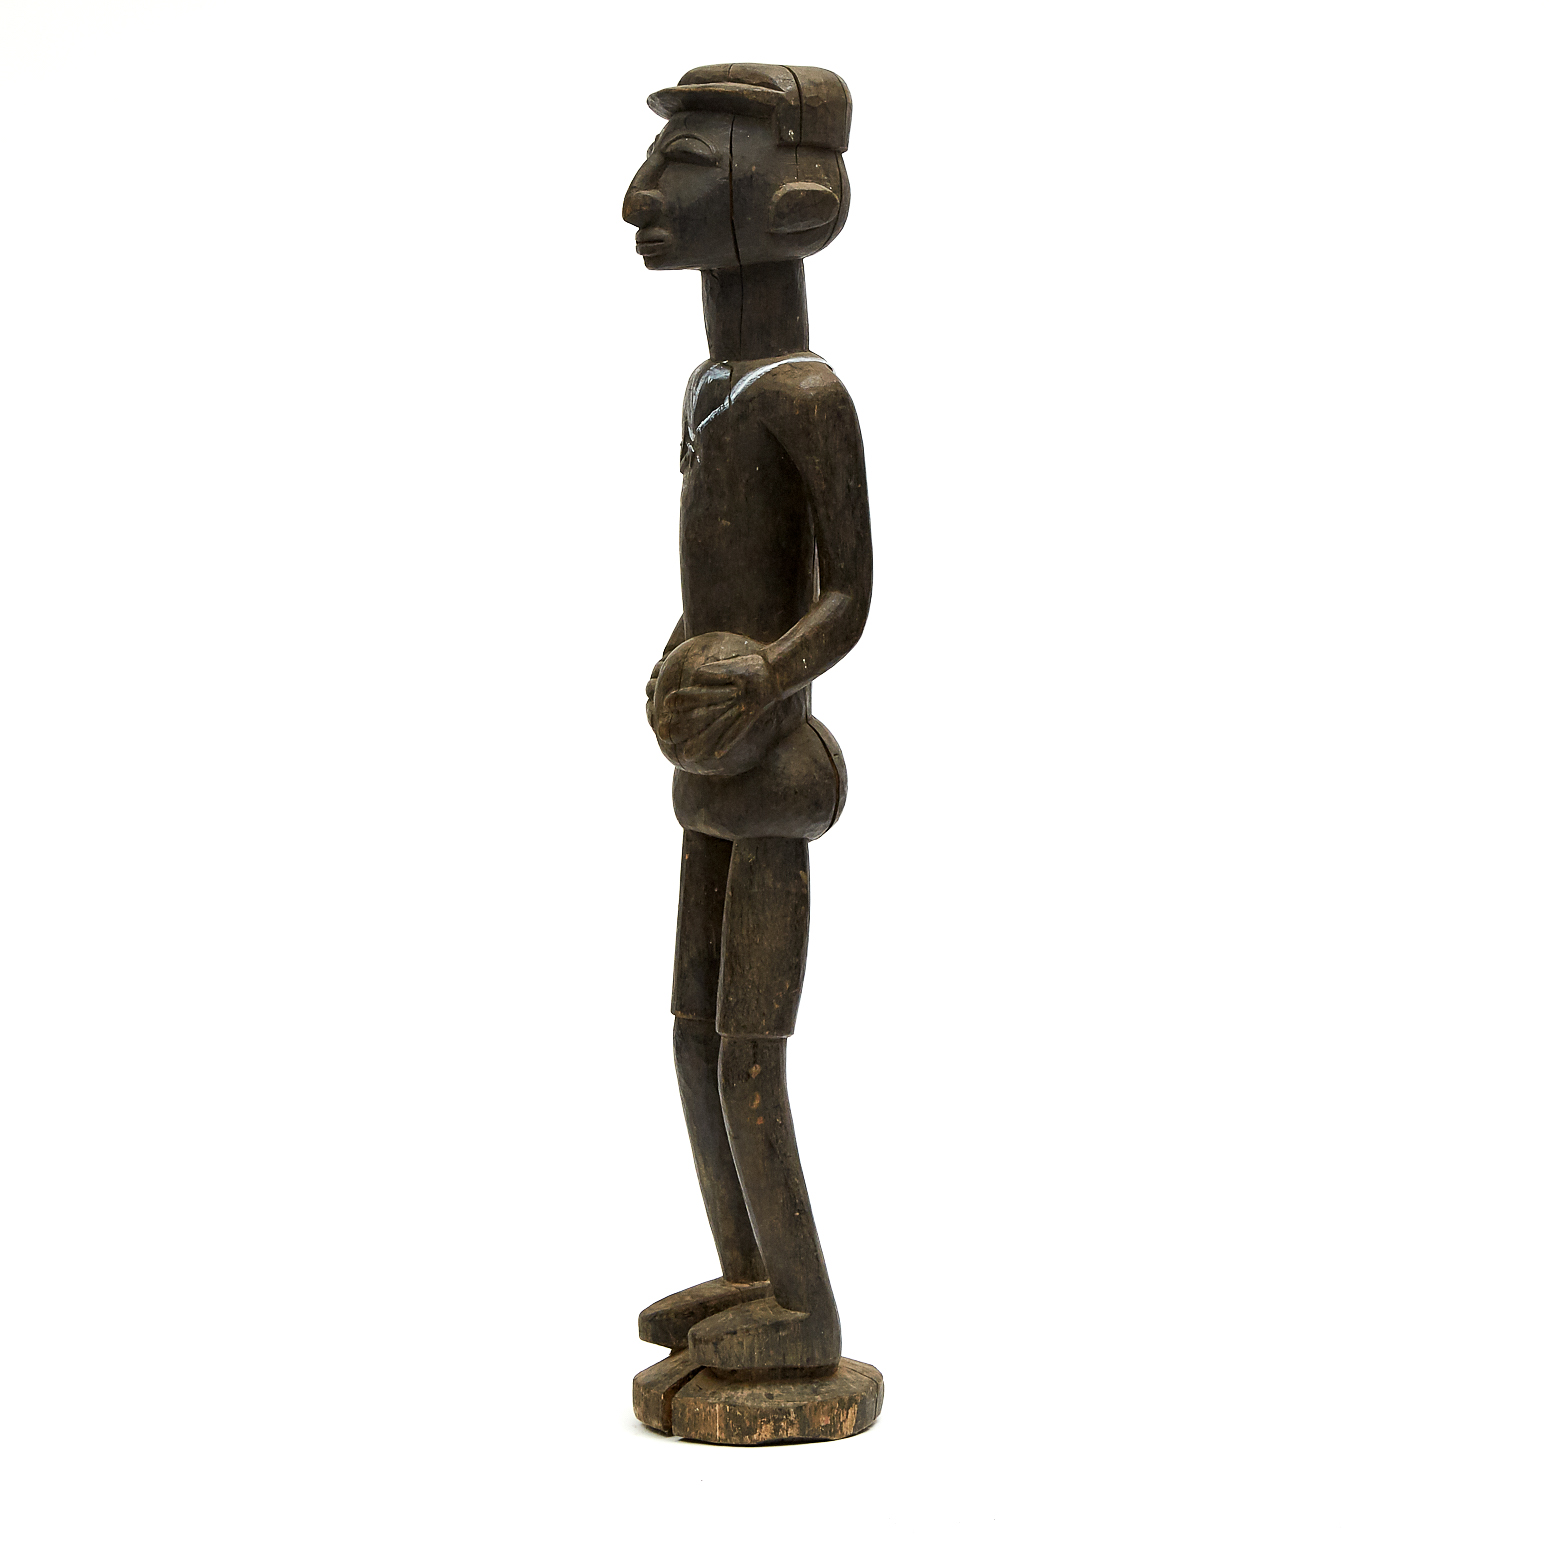 African Carved Wood Colonial Sailor Figure